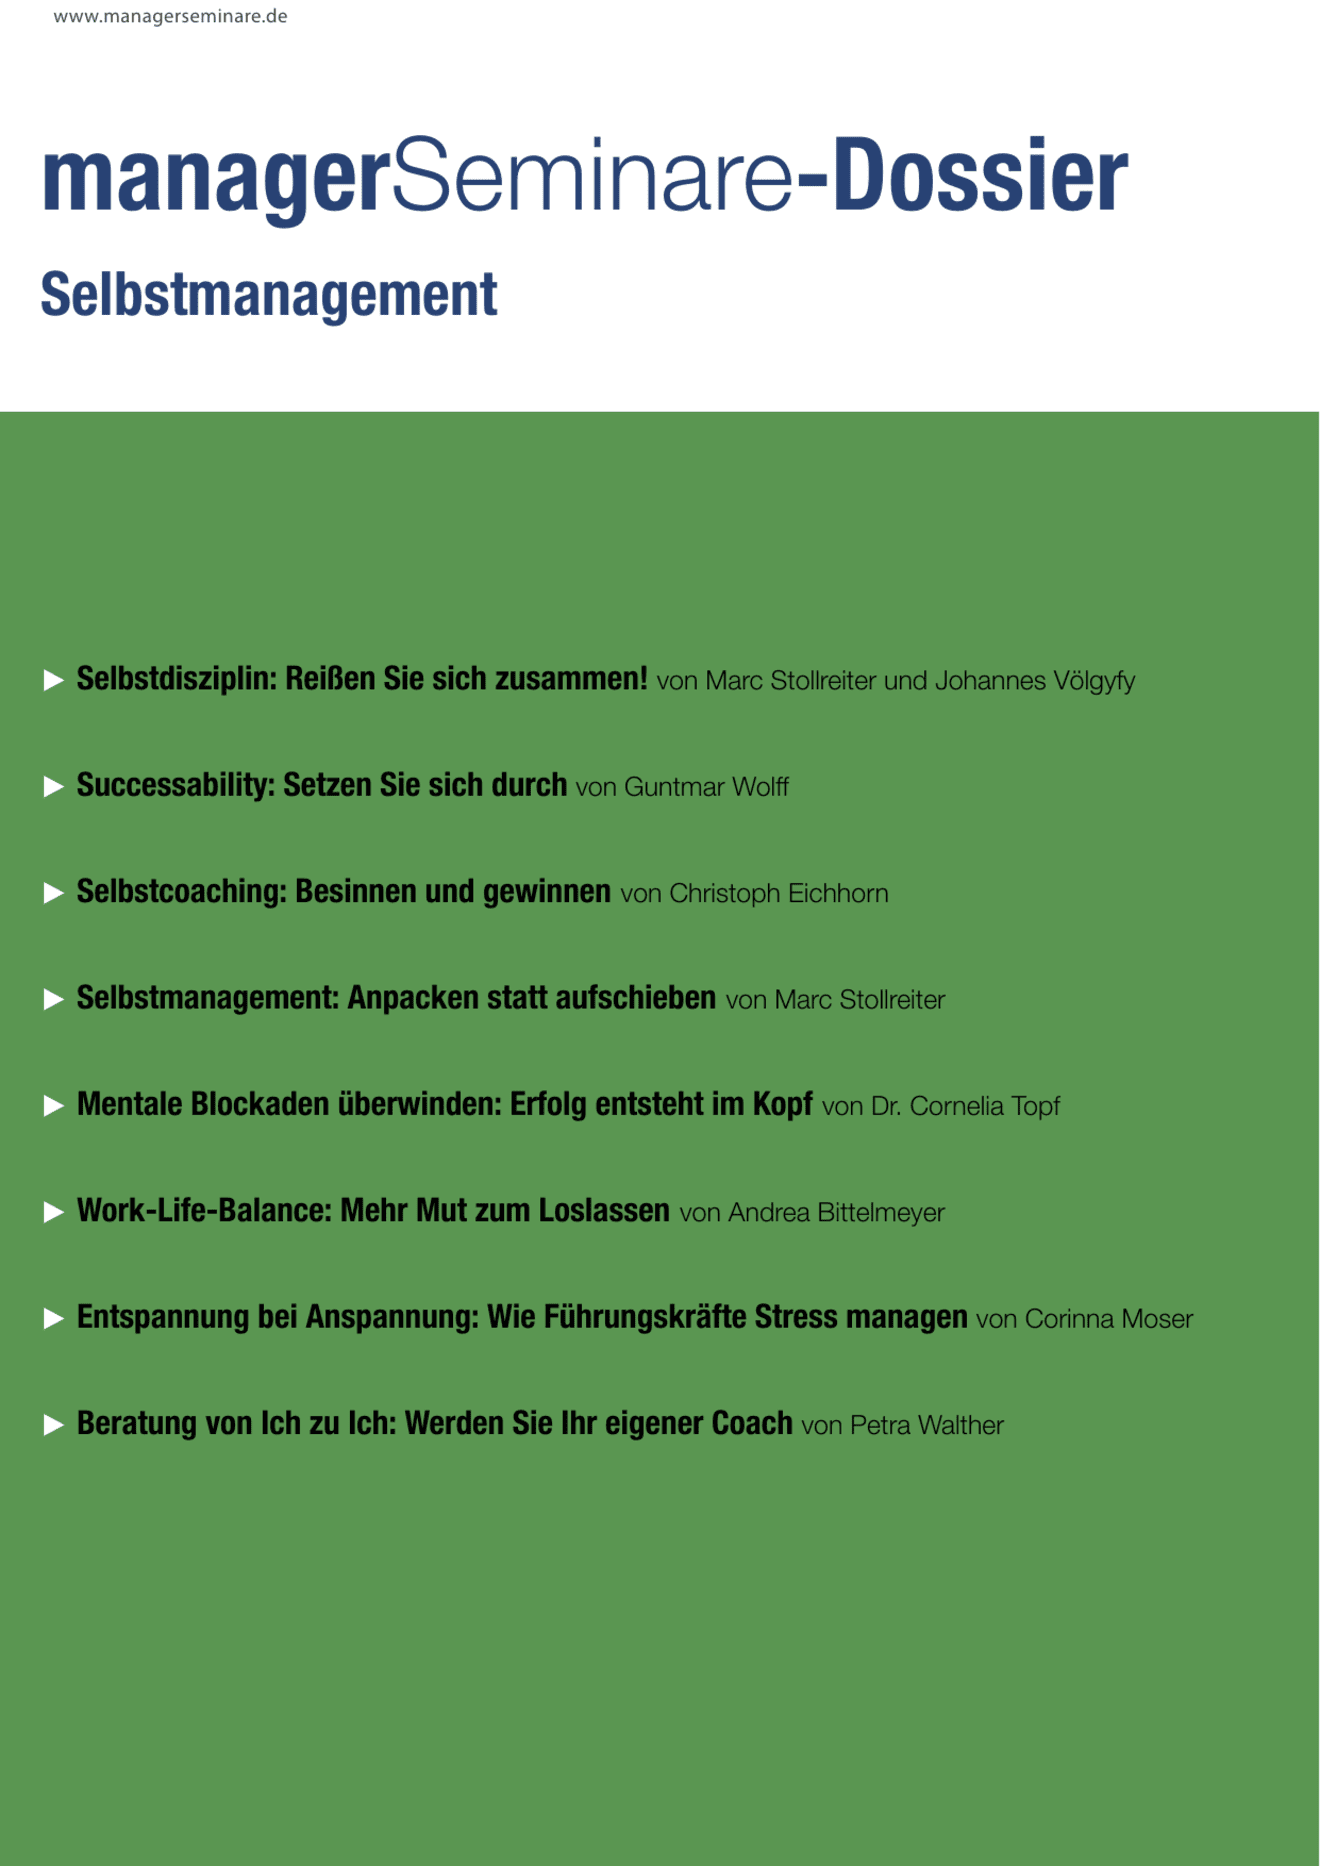 Dossier Selbstmanagement